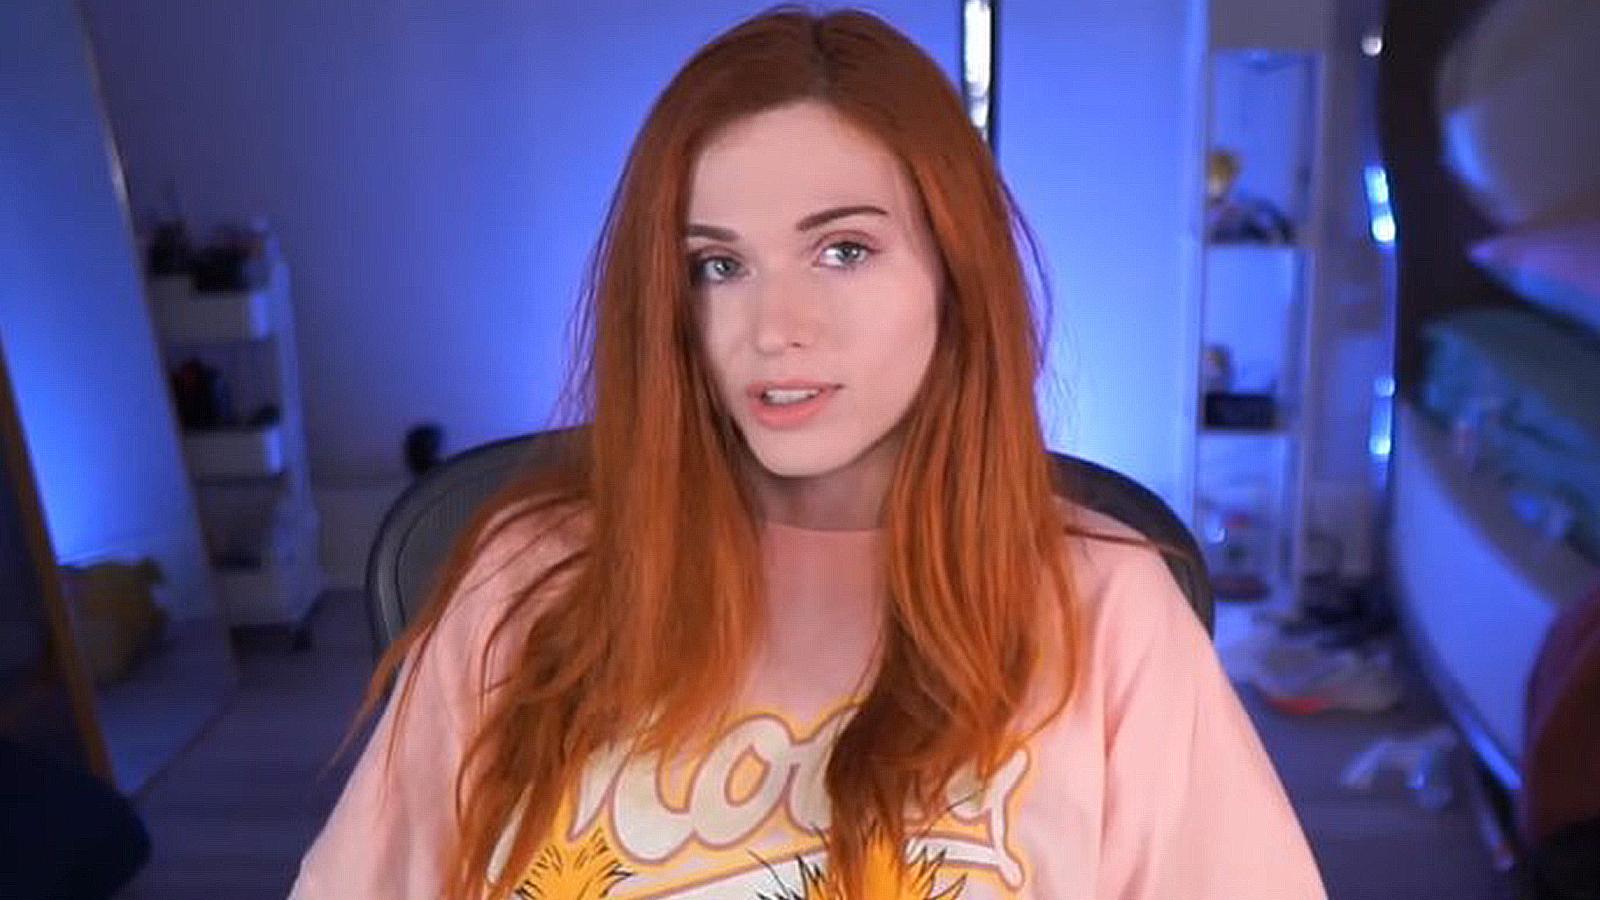 Amouranth employee addresses streamers accusations of clout chasing and doxxing